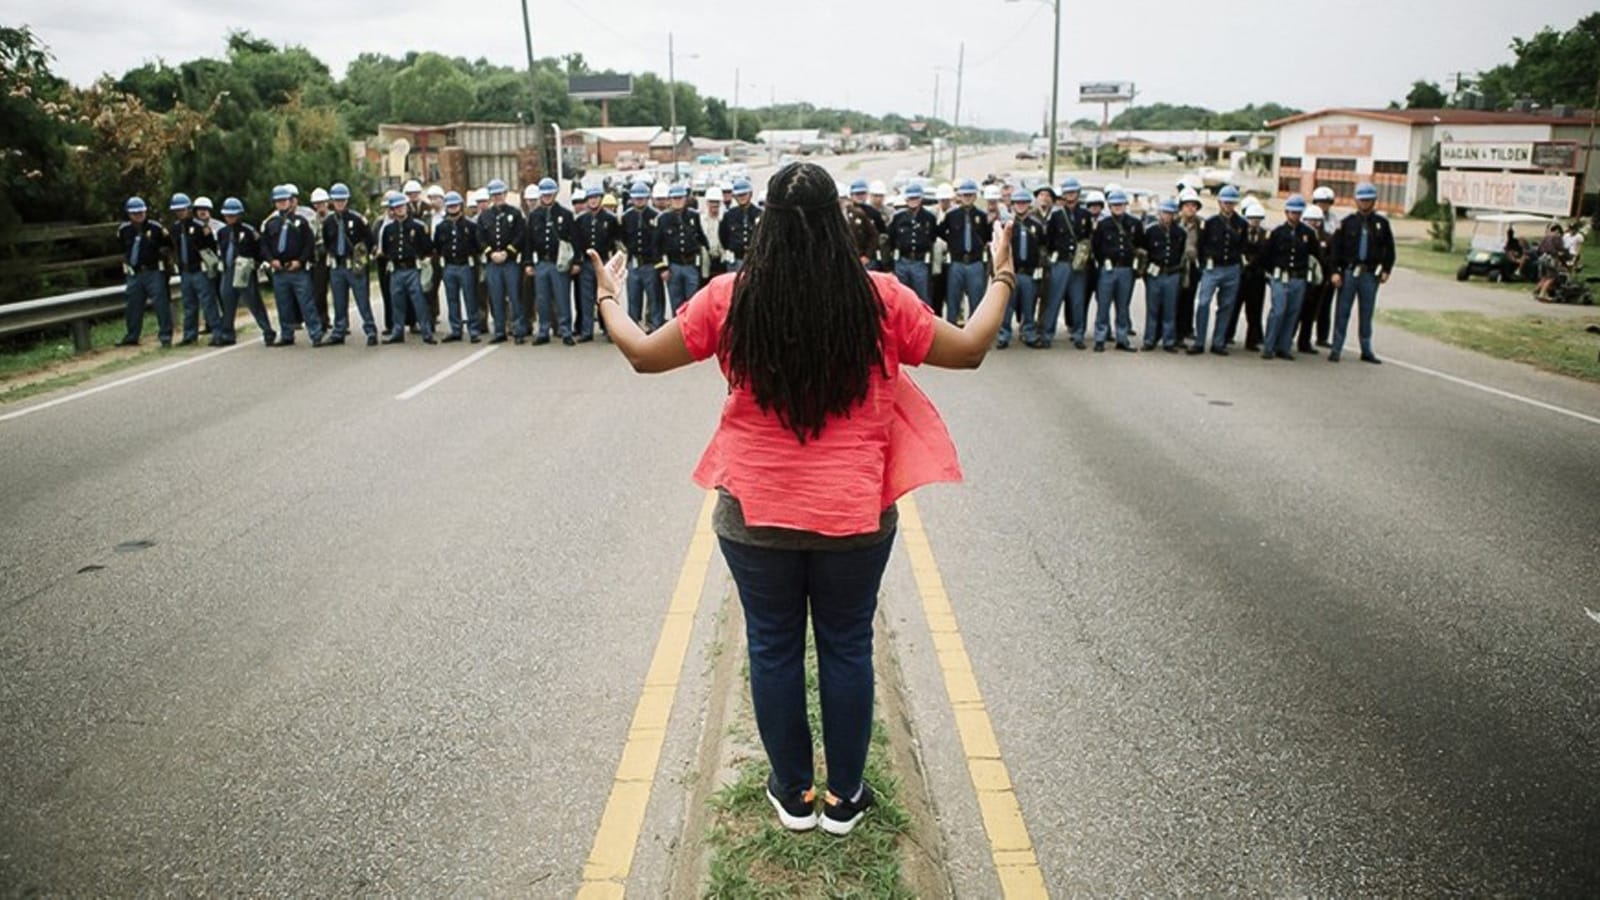 Ava DuVernay directs a scene from the film Selma